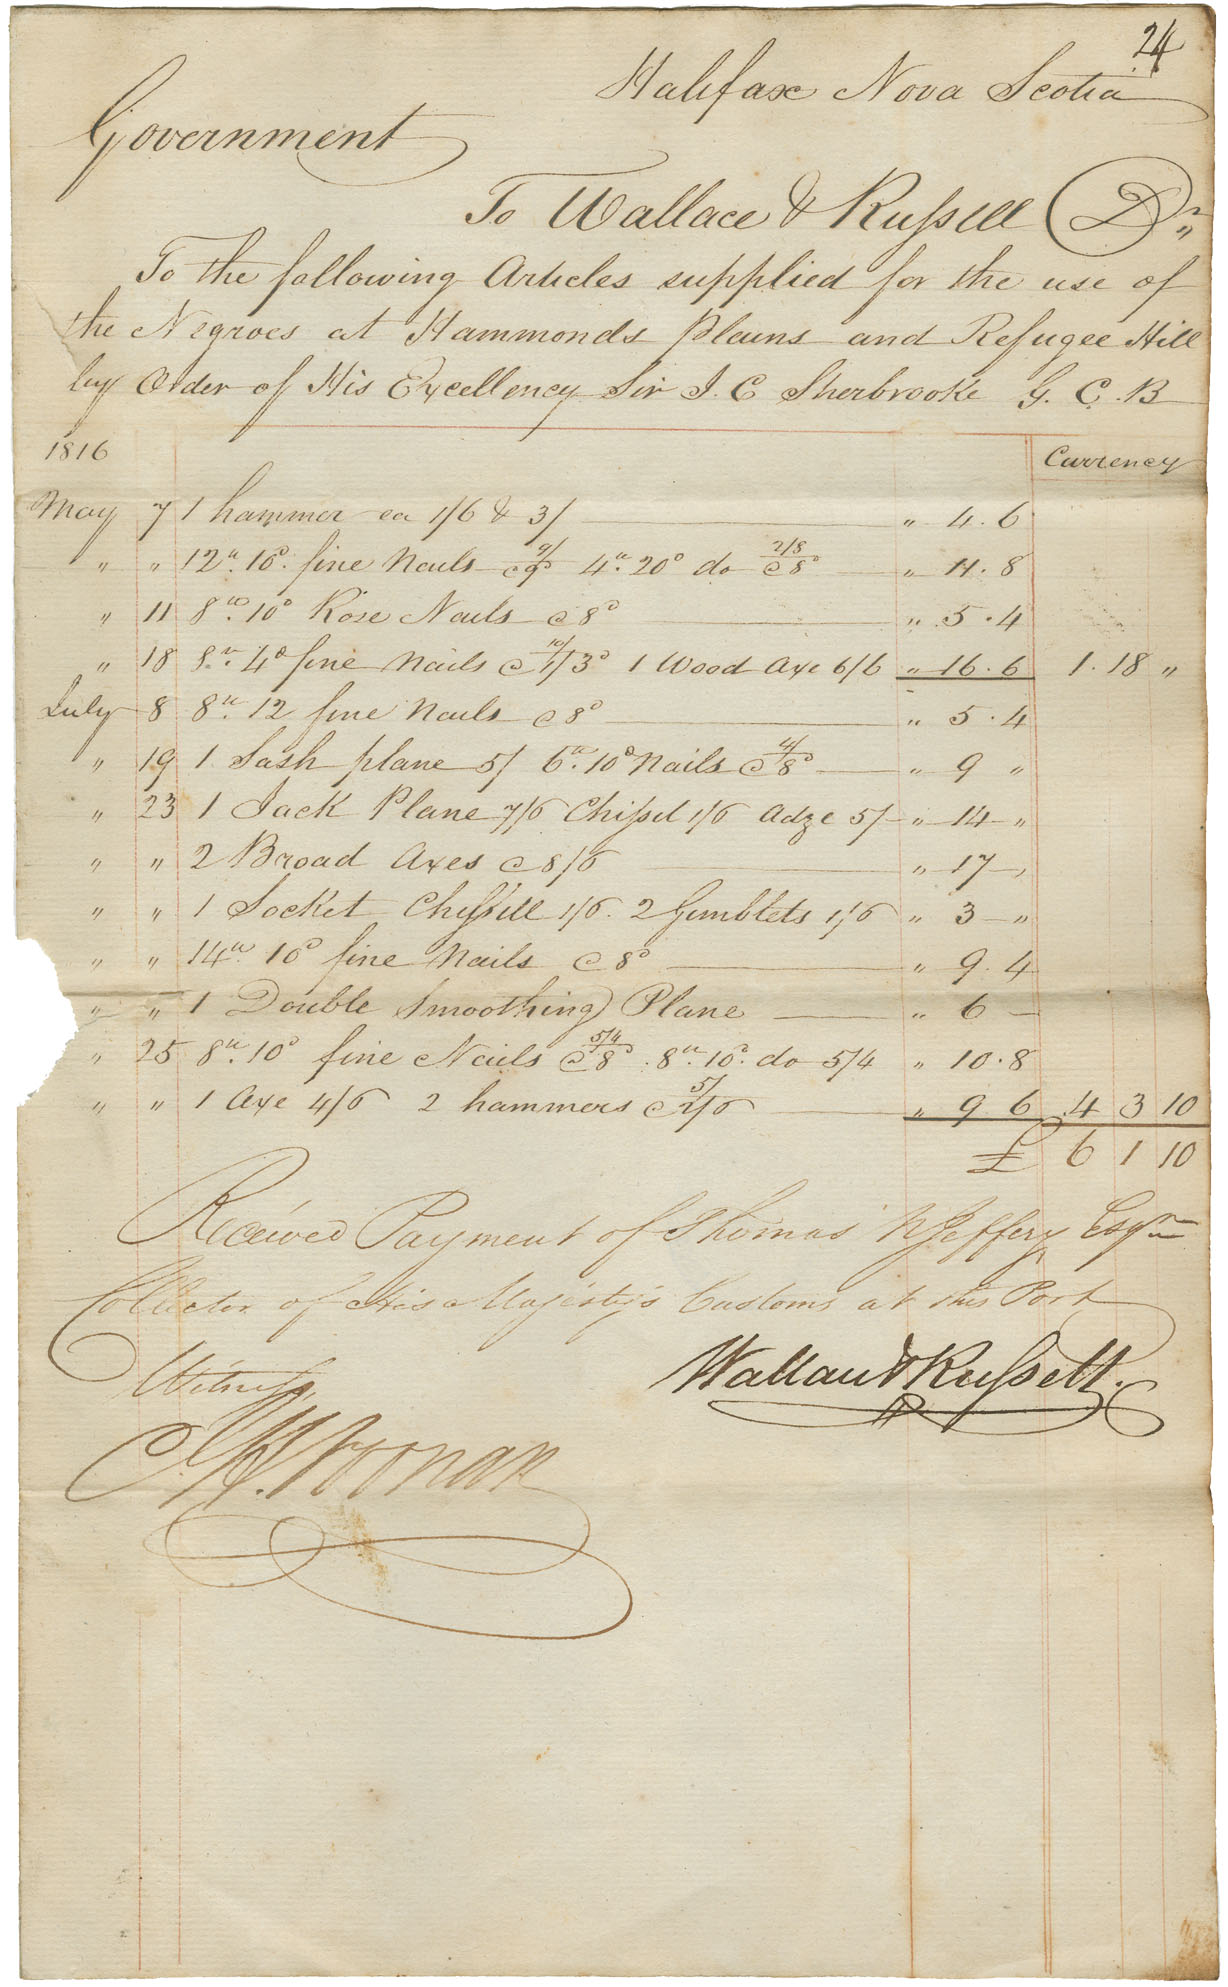 african-heritage : Accounts against Government for supplies for Black Refugees during the year 1816, with the following suppliers: John H. Noonan, Lewis DeMoli